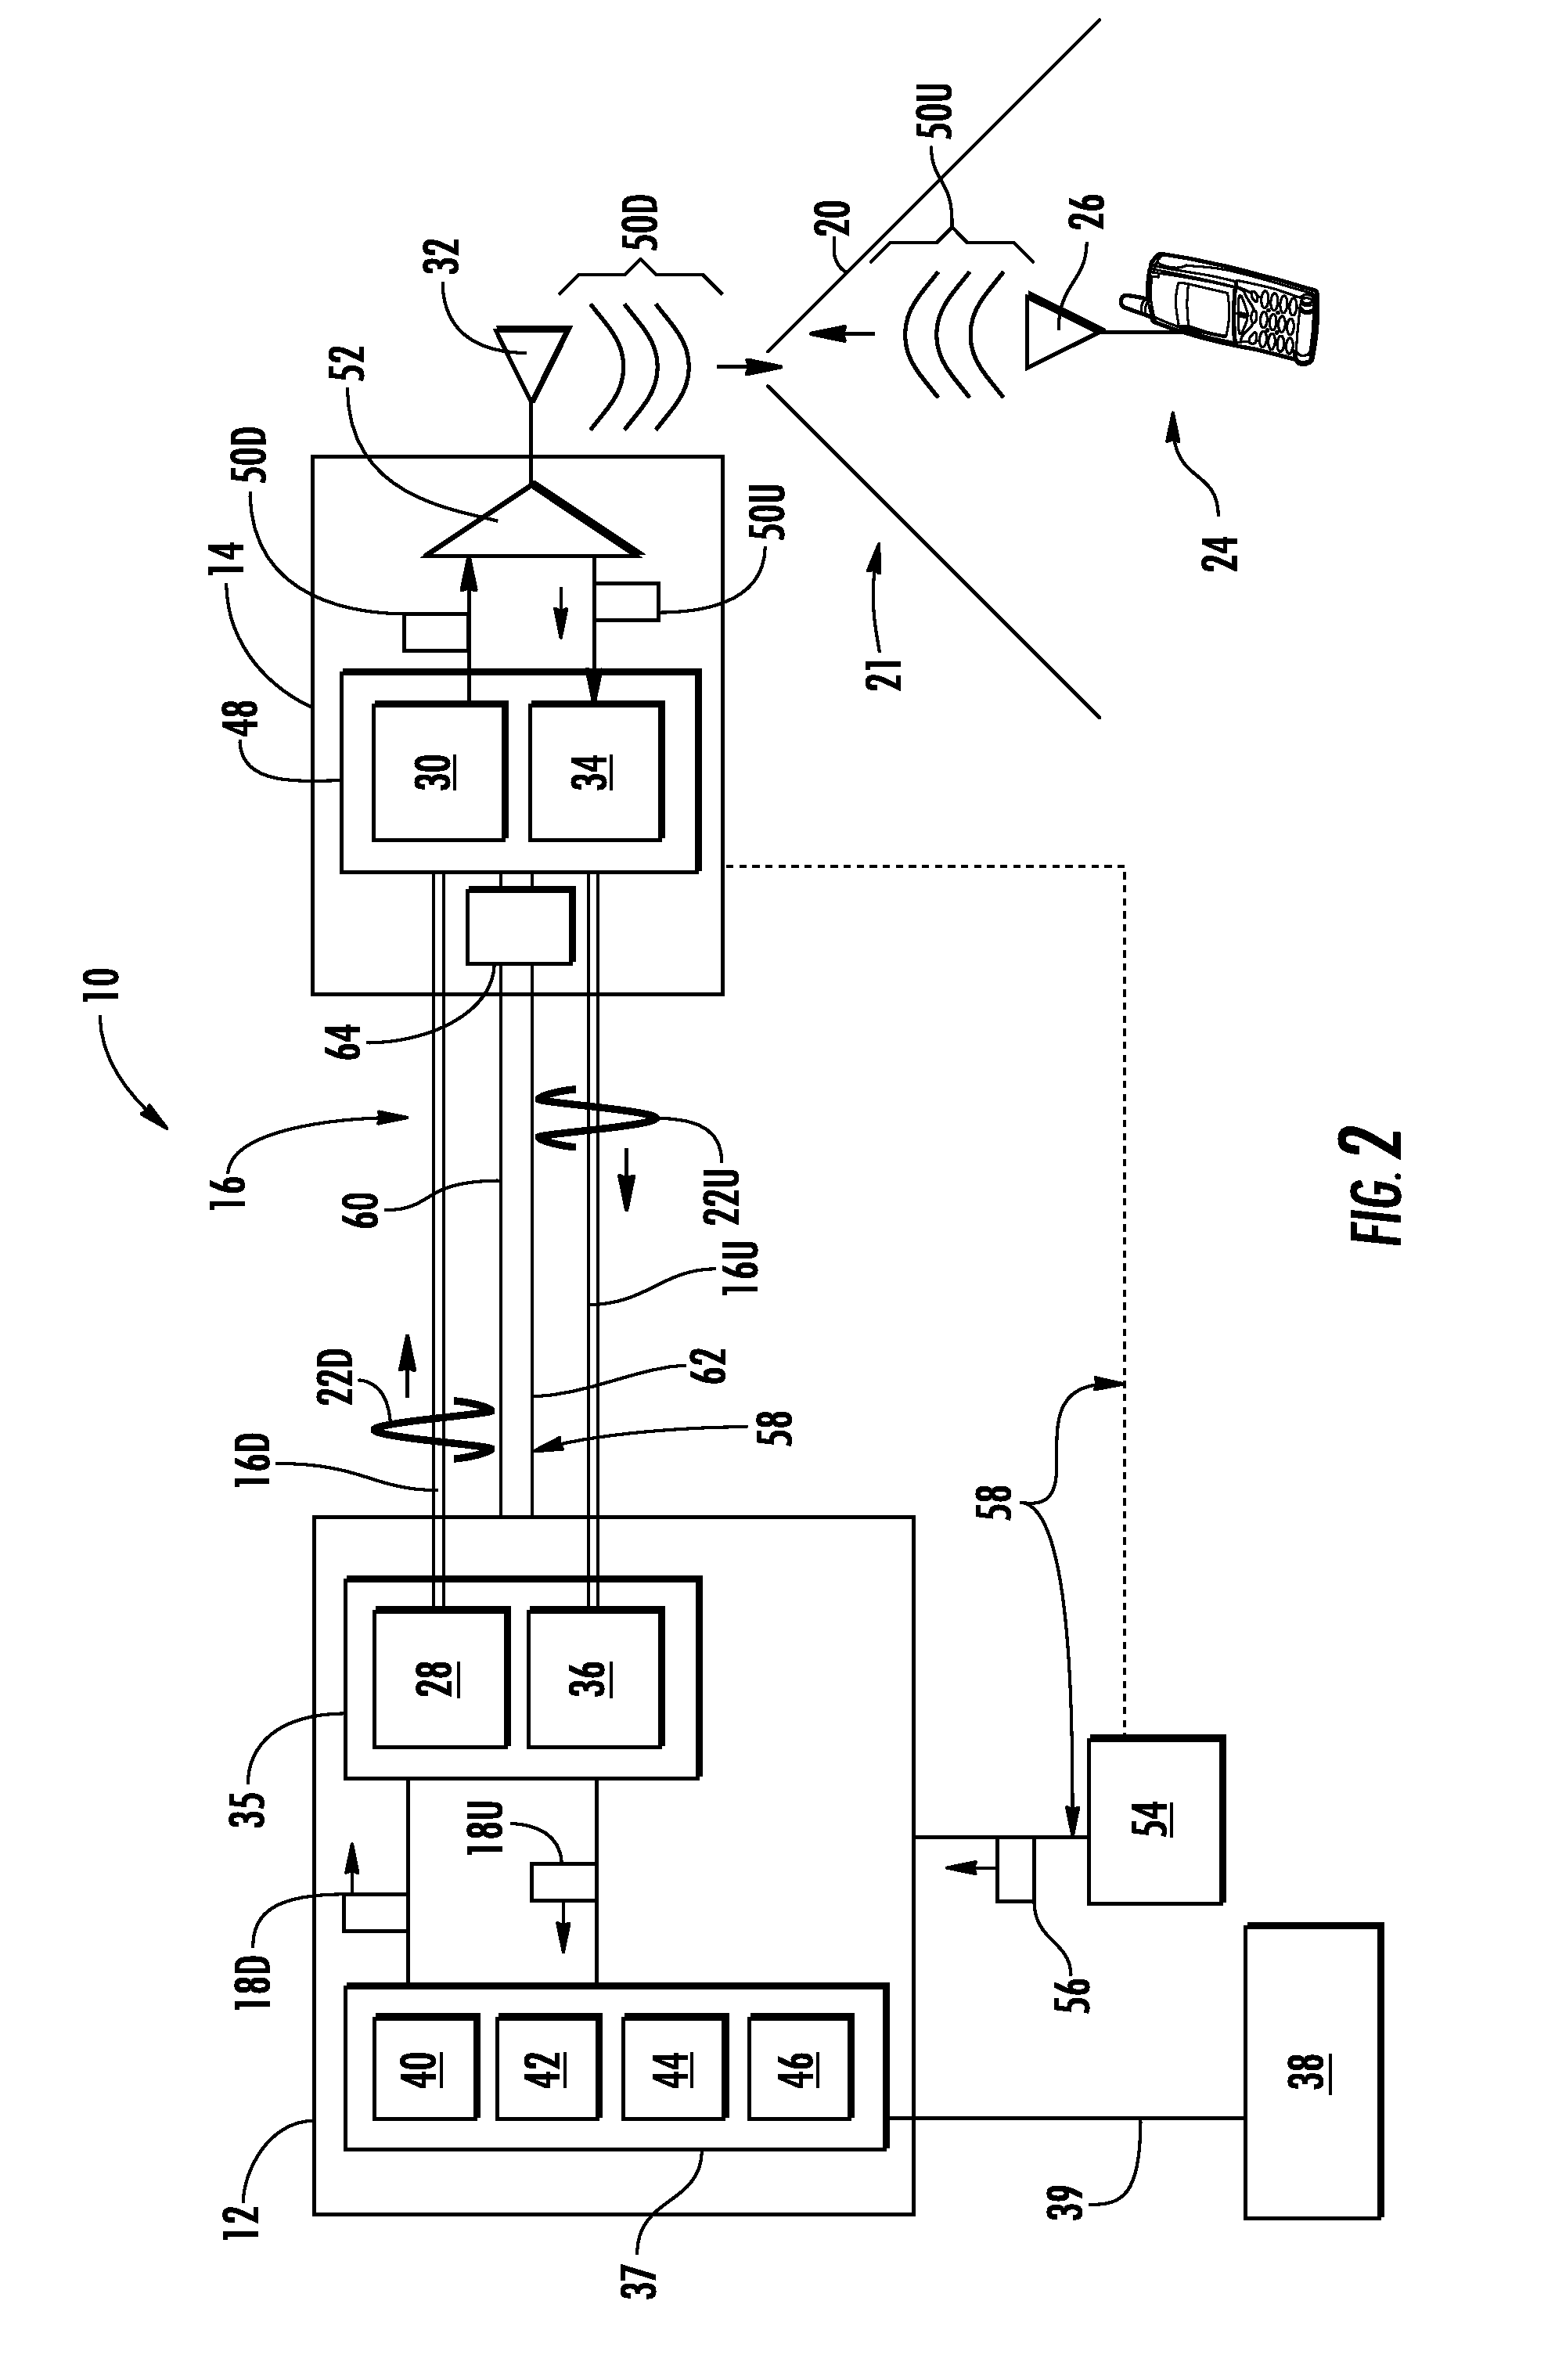 Optical fiber-based distributed communications components, systems, and methods employing wavelength division multiplexing (WDM) for enhanced upgradability